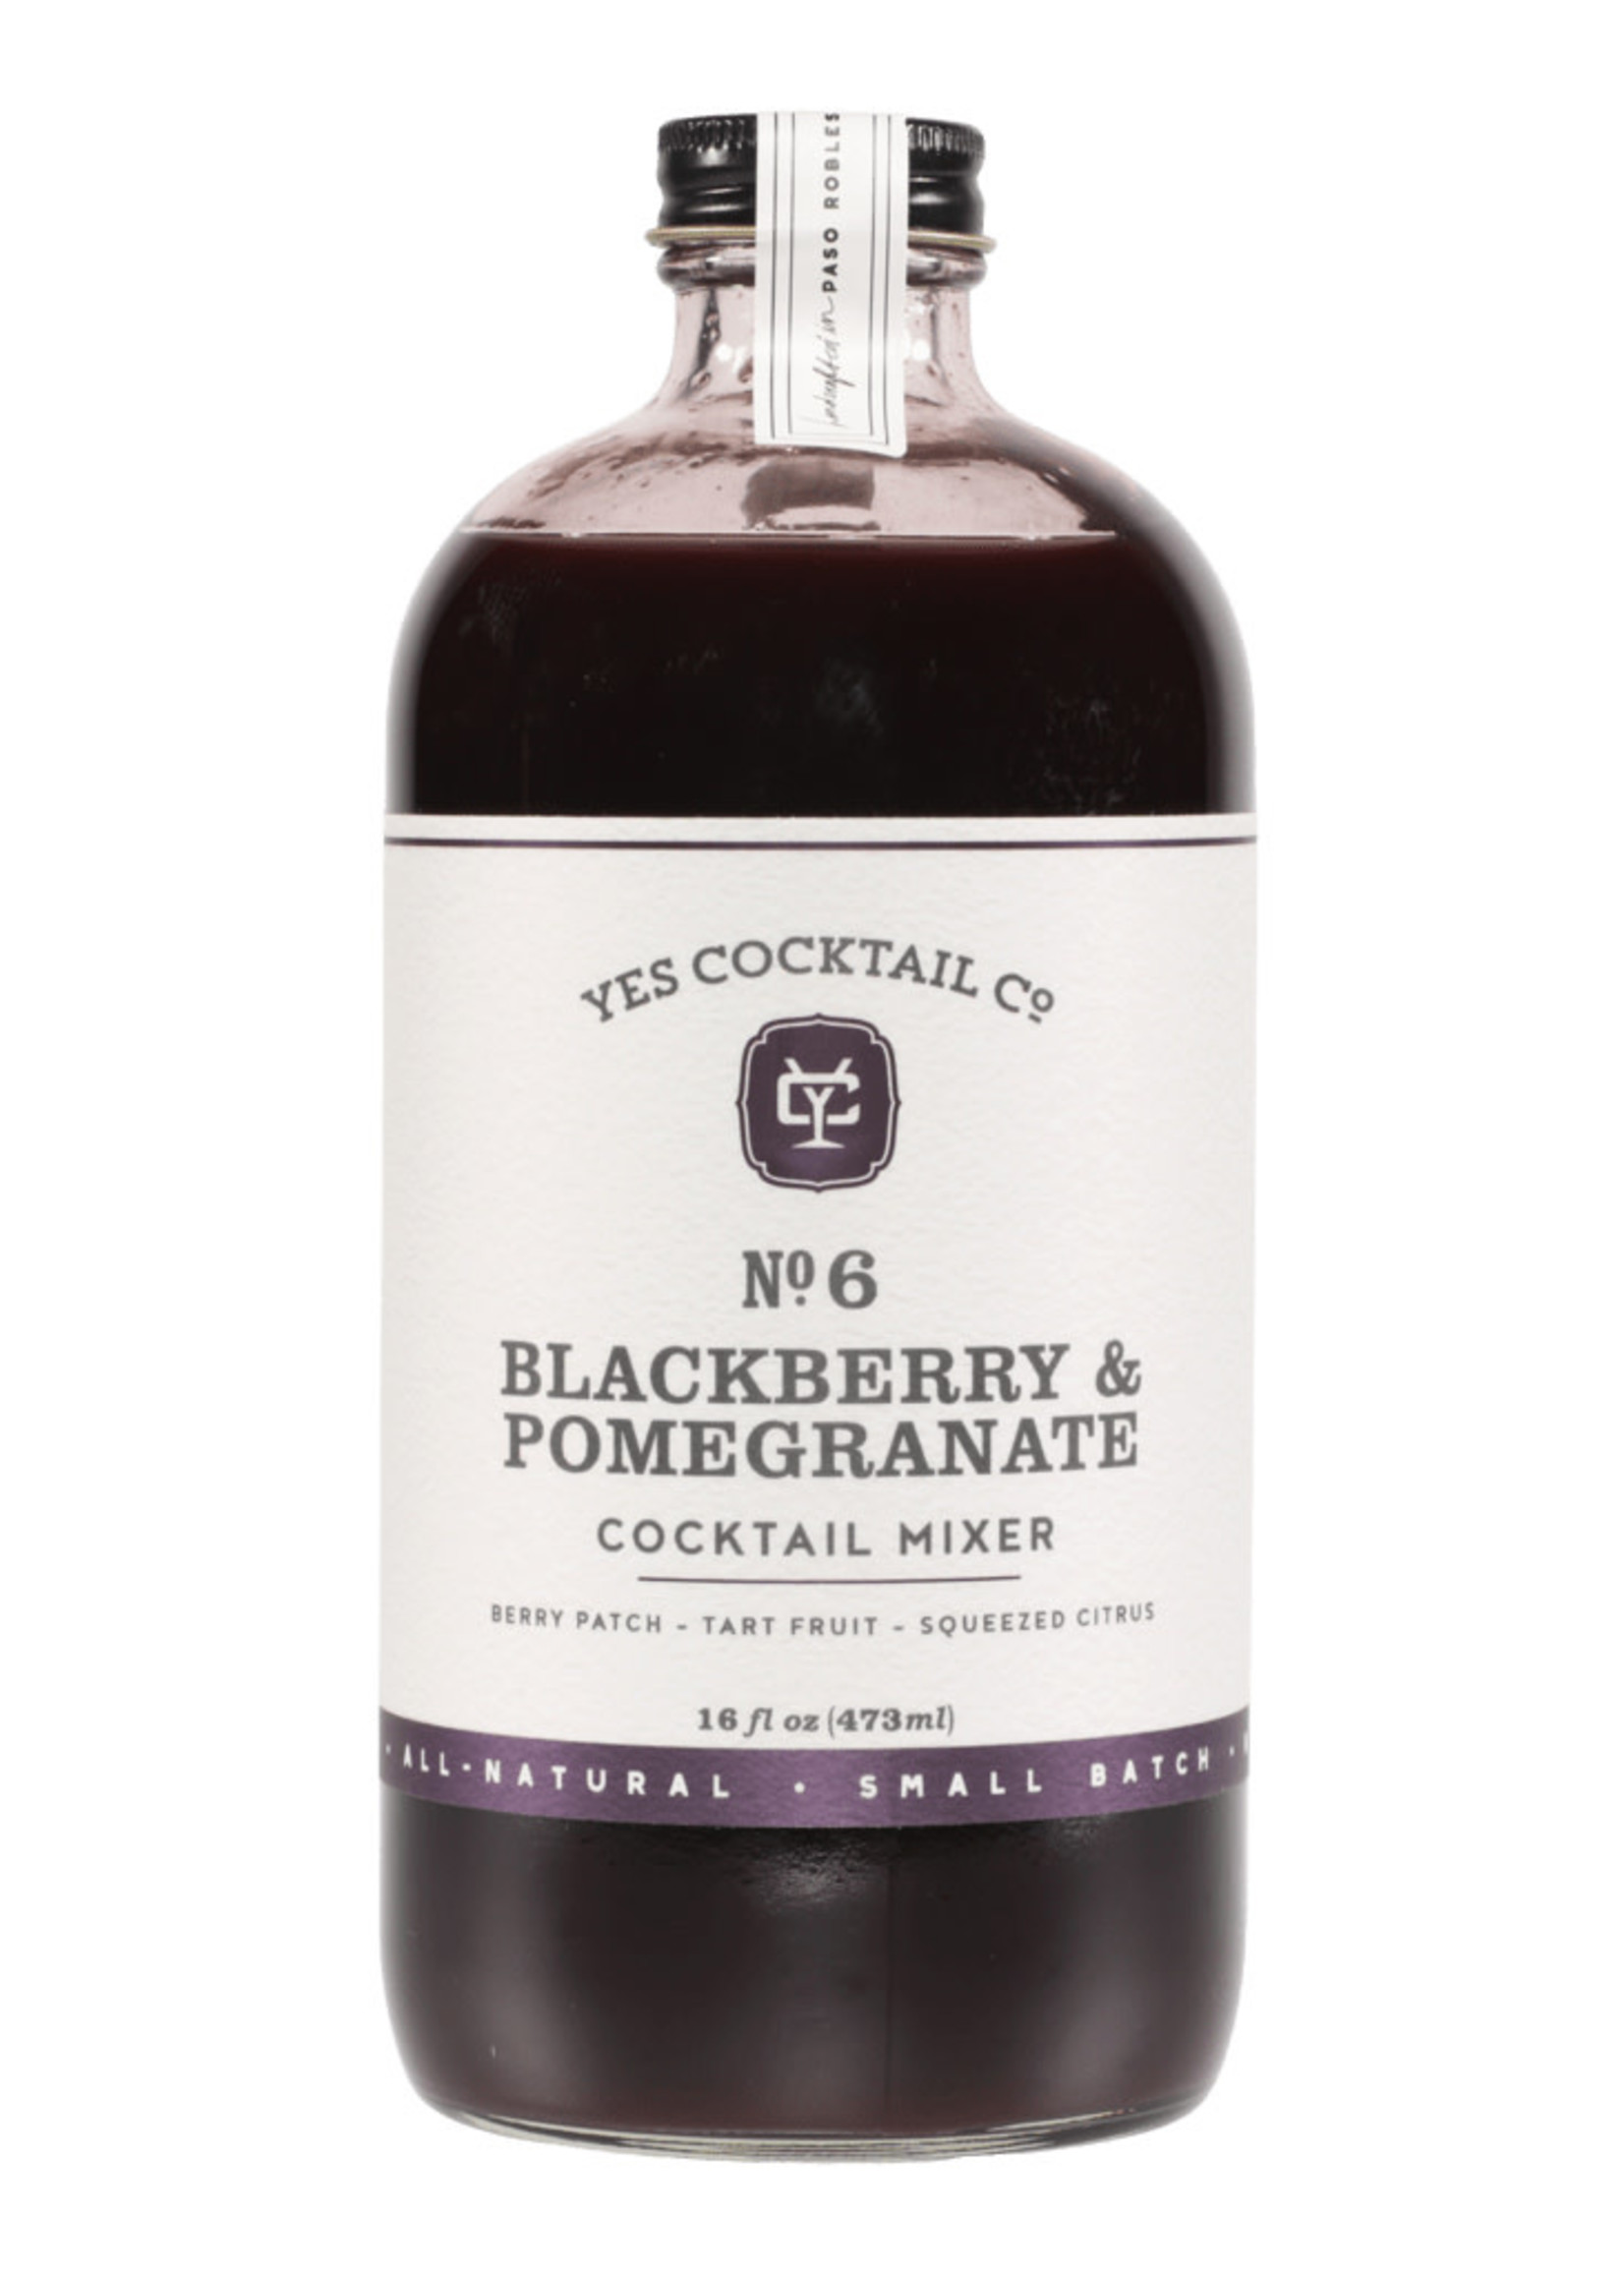 Yes Cocktail Co Yes Cocktail Co, No 6 Blackberry & Pomegranate Cocktail Mixer, 16oz